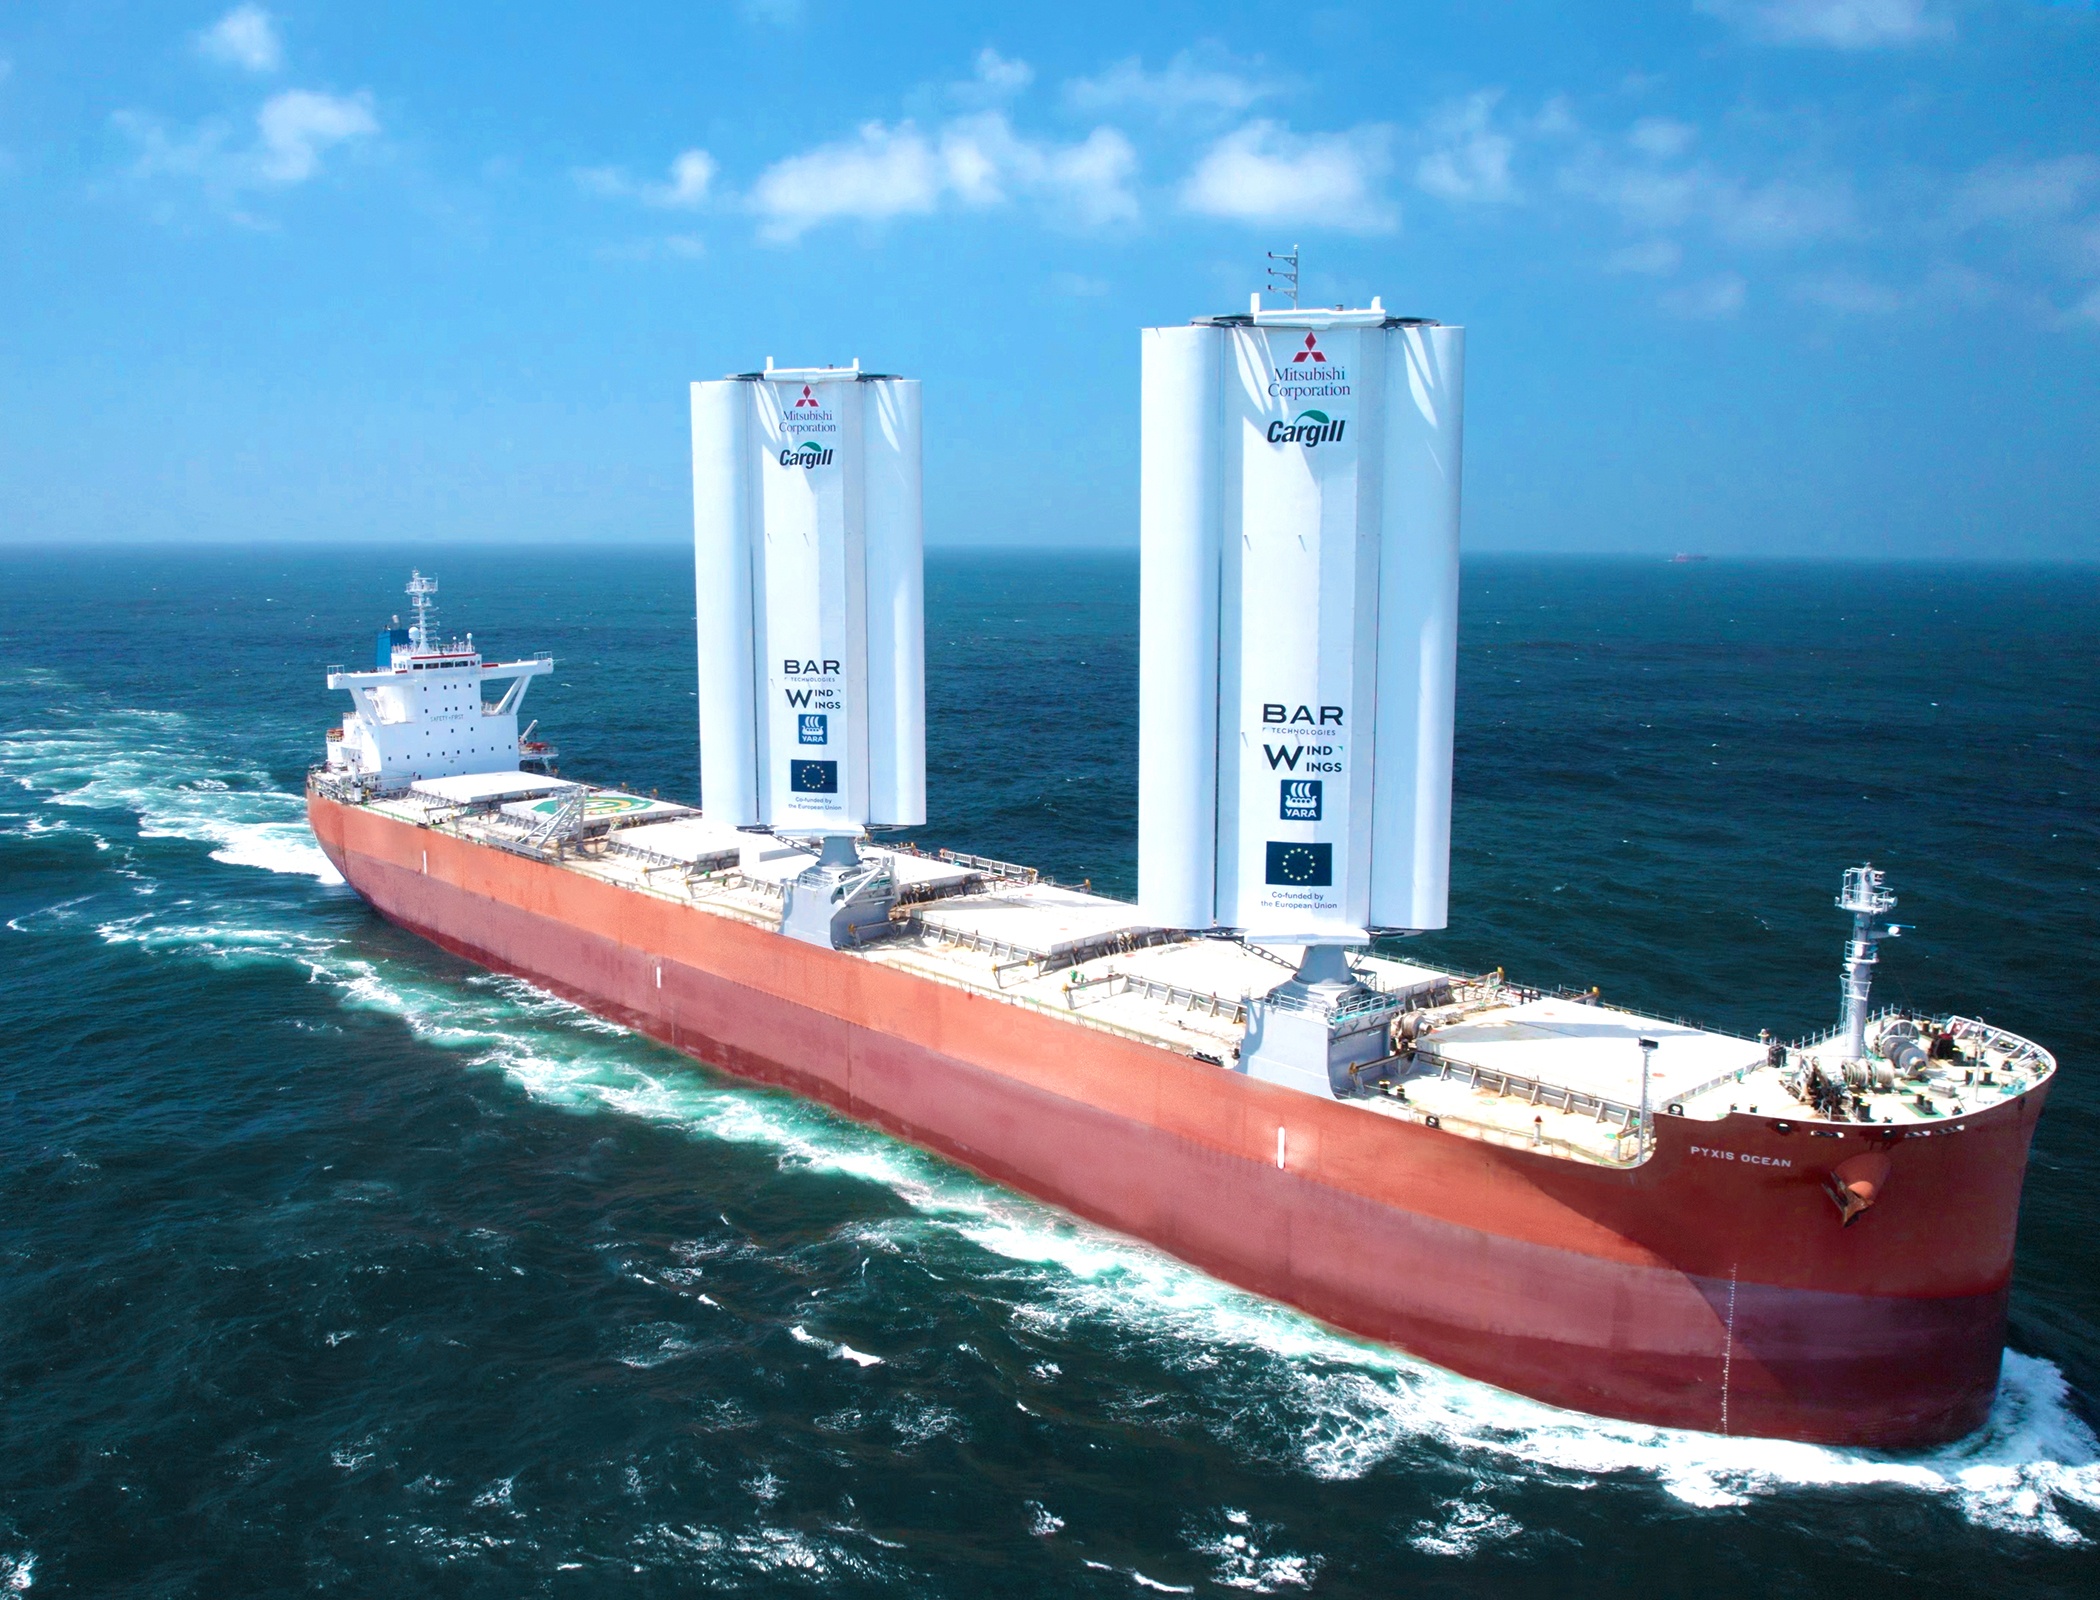 Cargo ship fitted with massive sails in bid to cut emissions